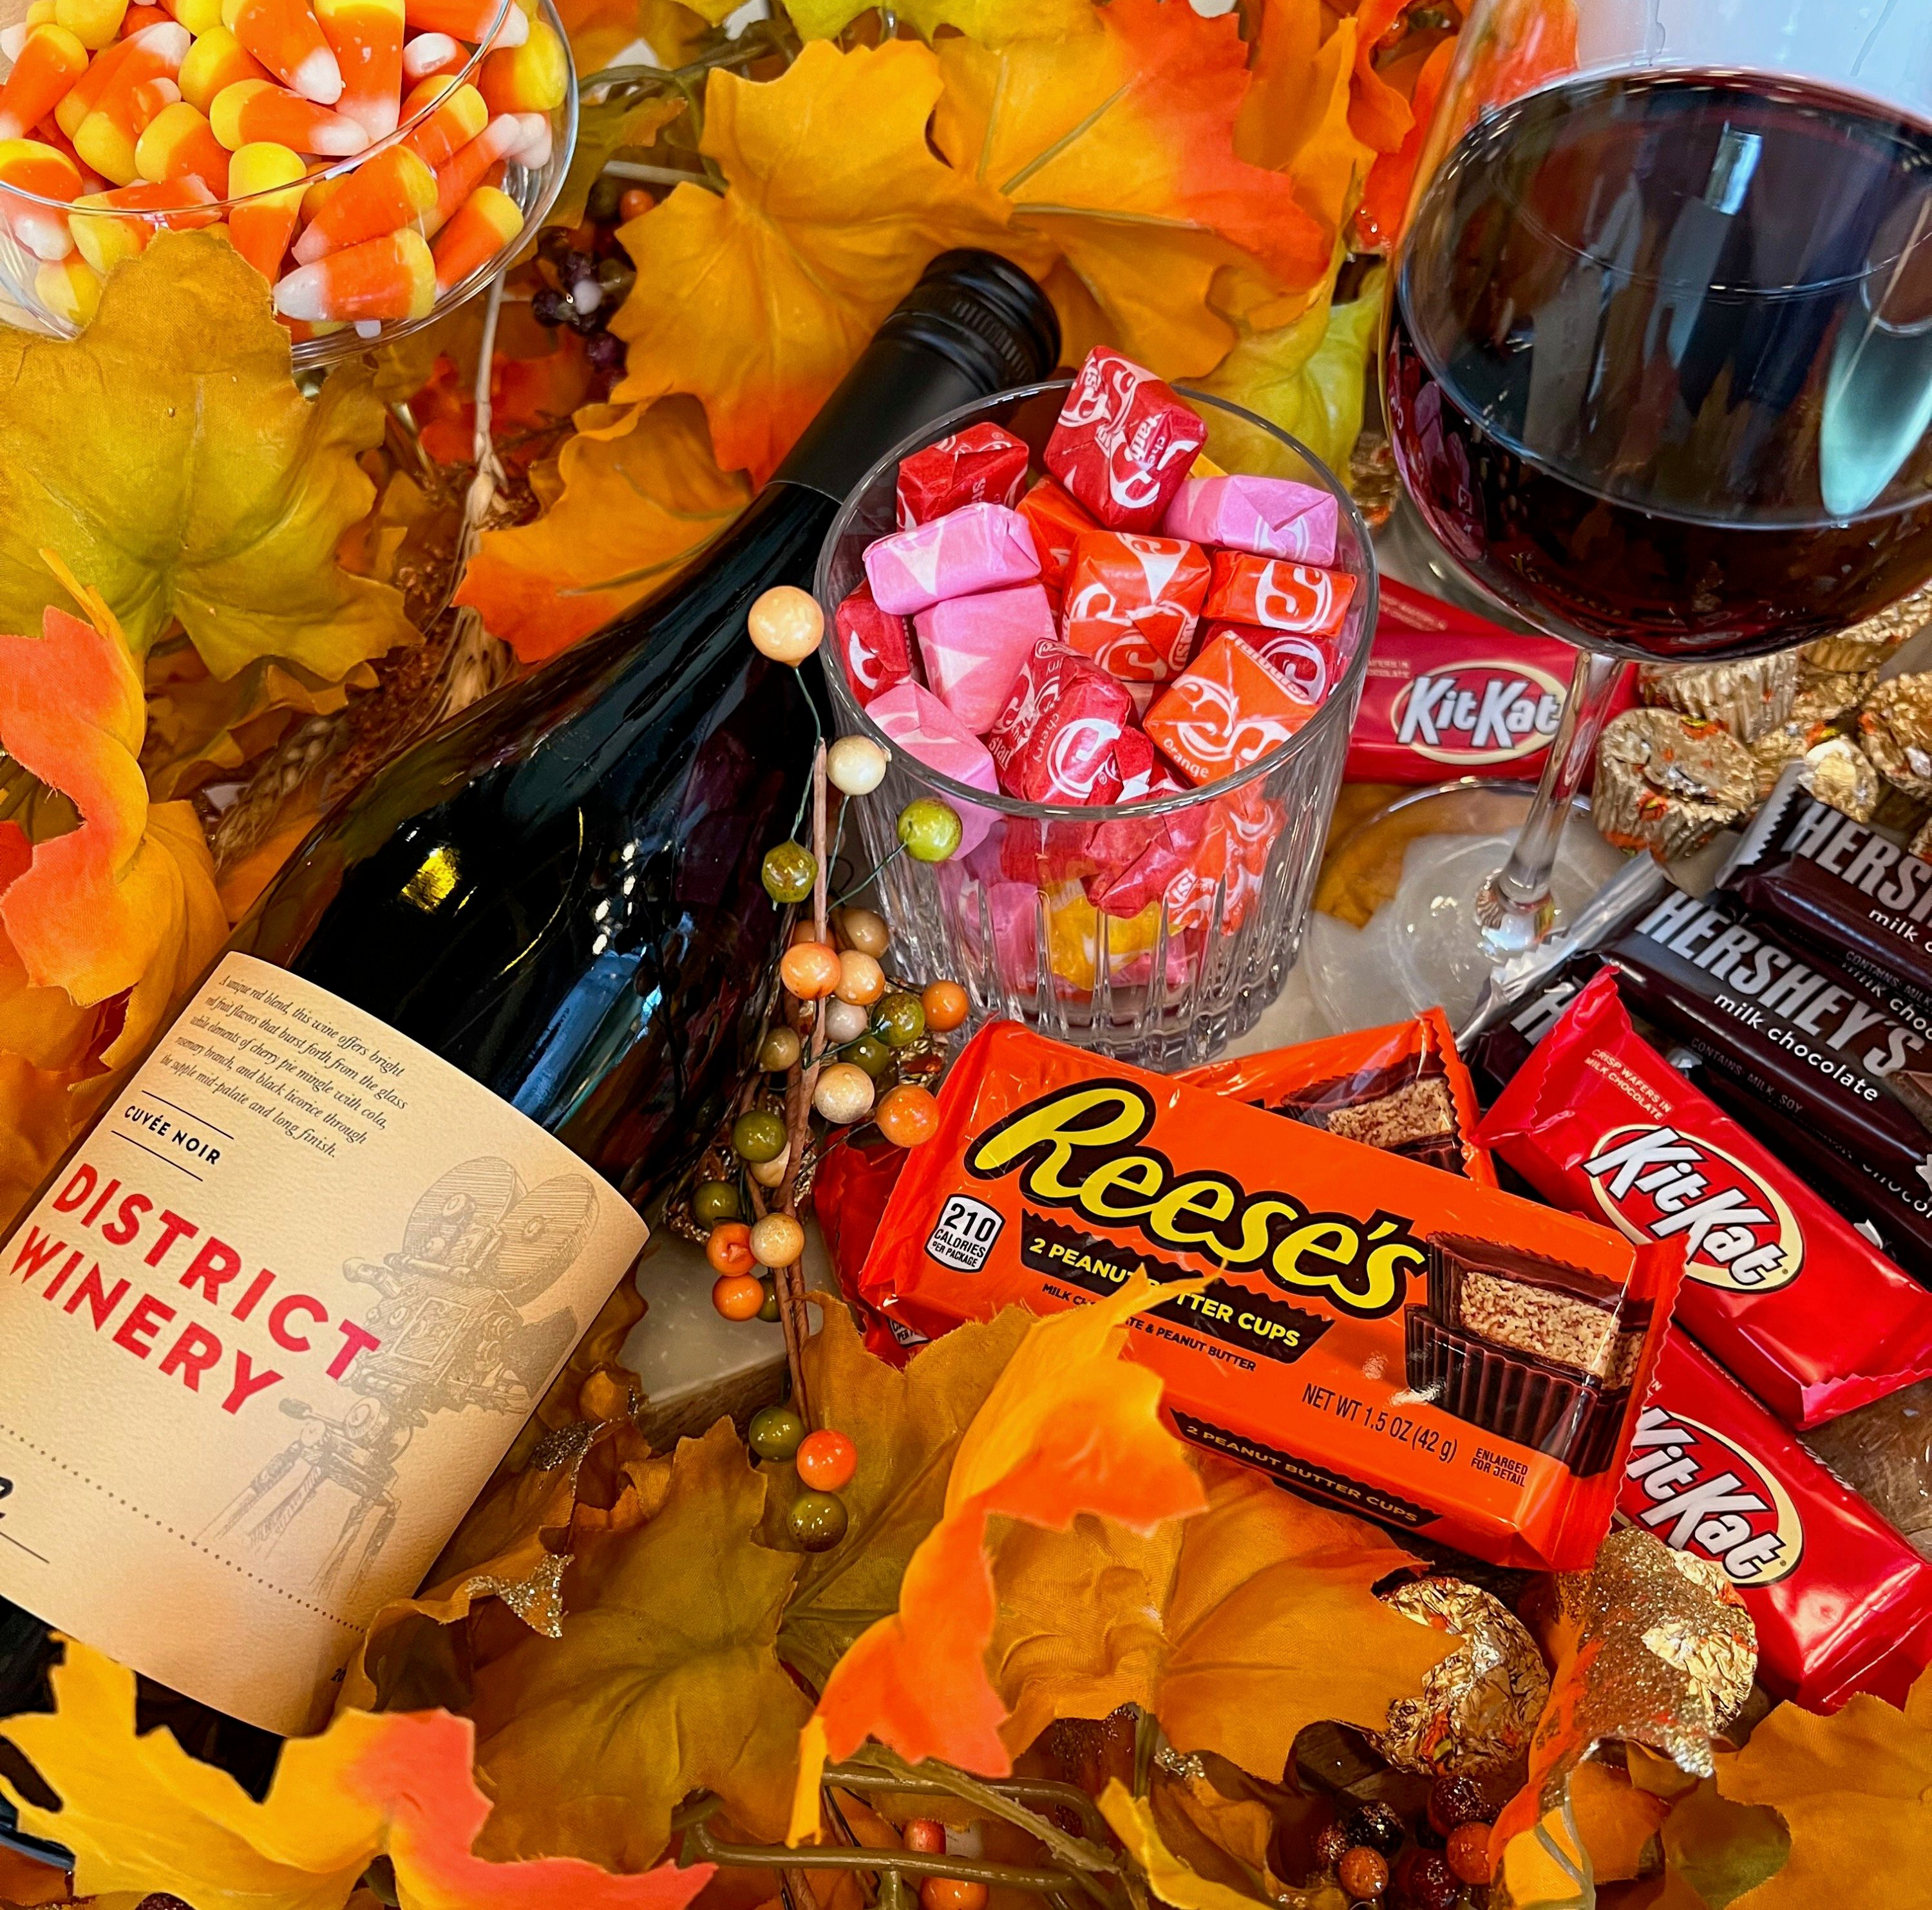 A bottle of wine with the label "District Winery" sits on top of a pile of candy.